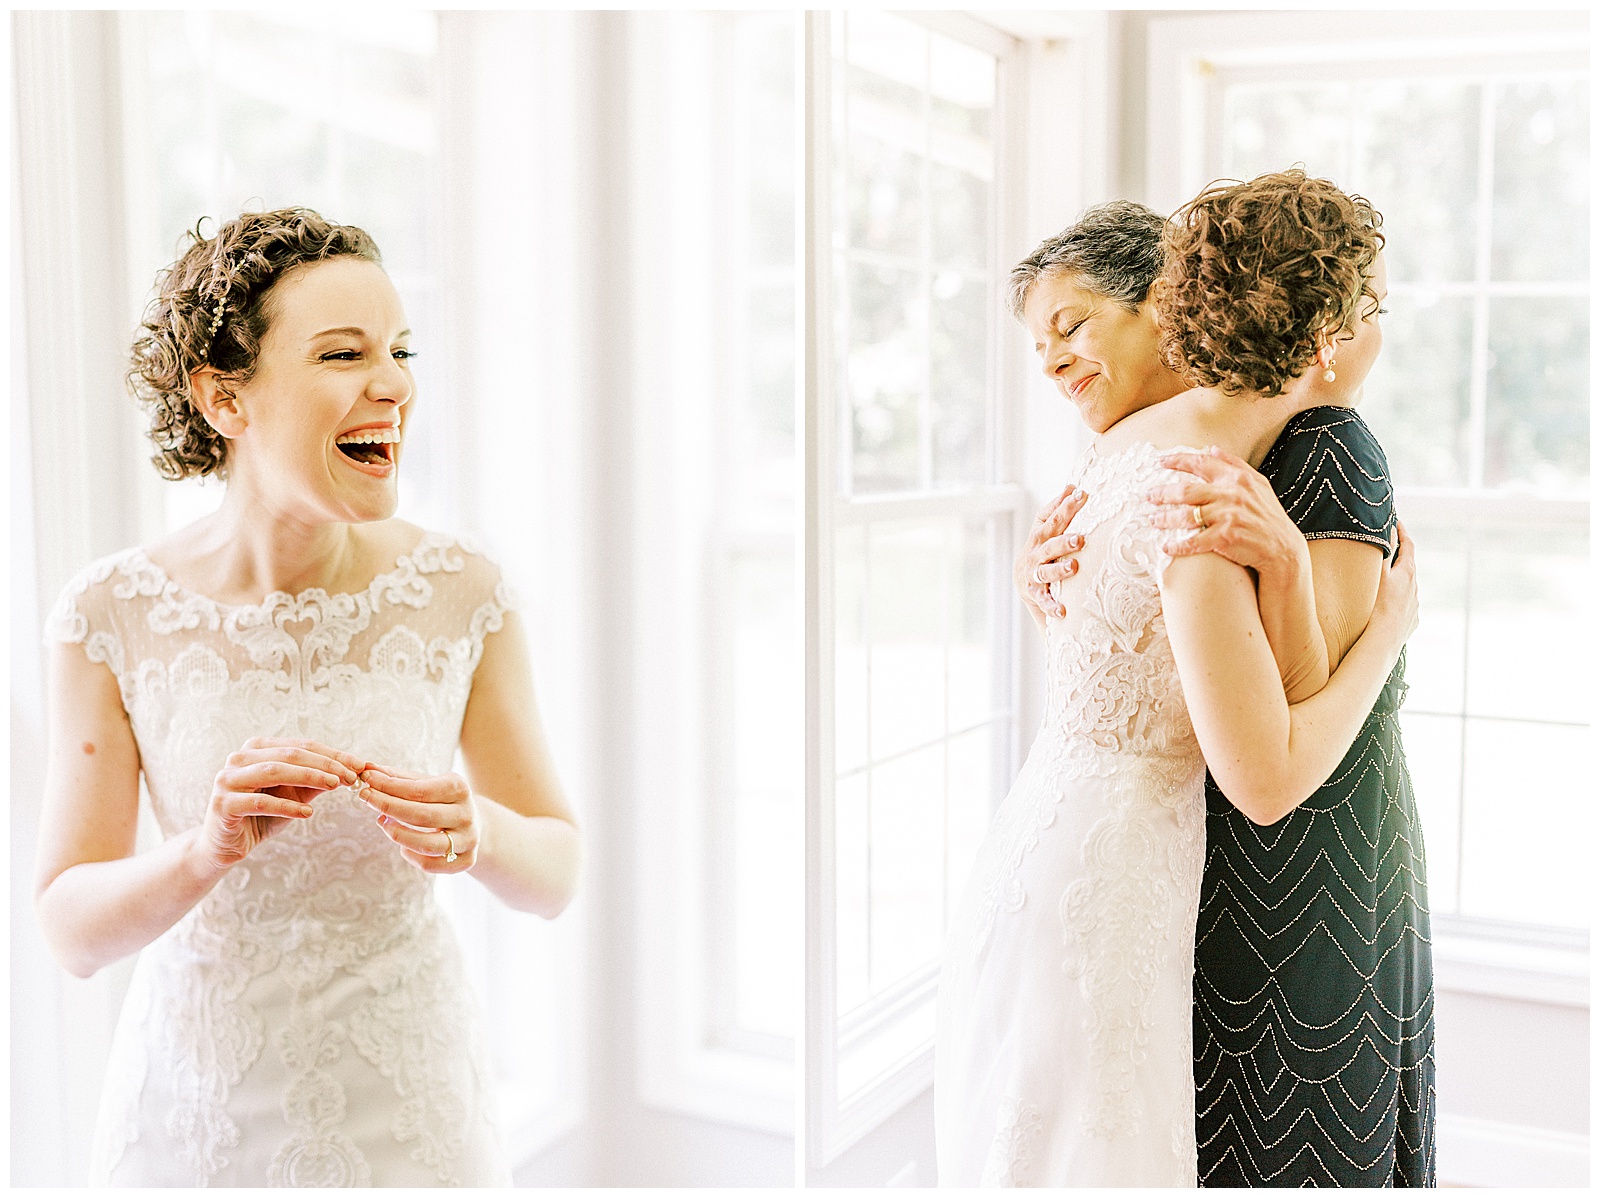 curly short haired bride getting ready in light and airy glass window bridal suite